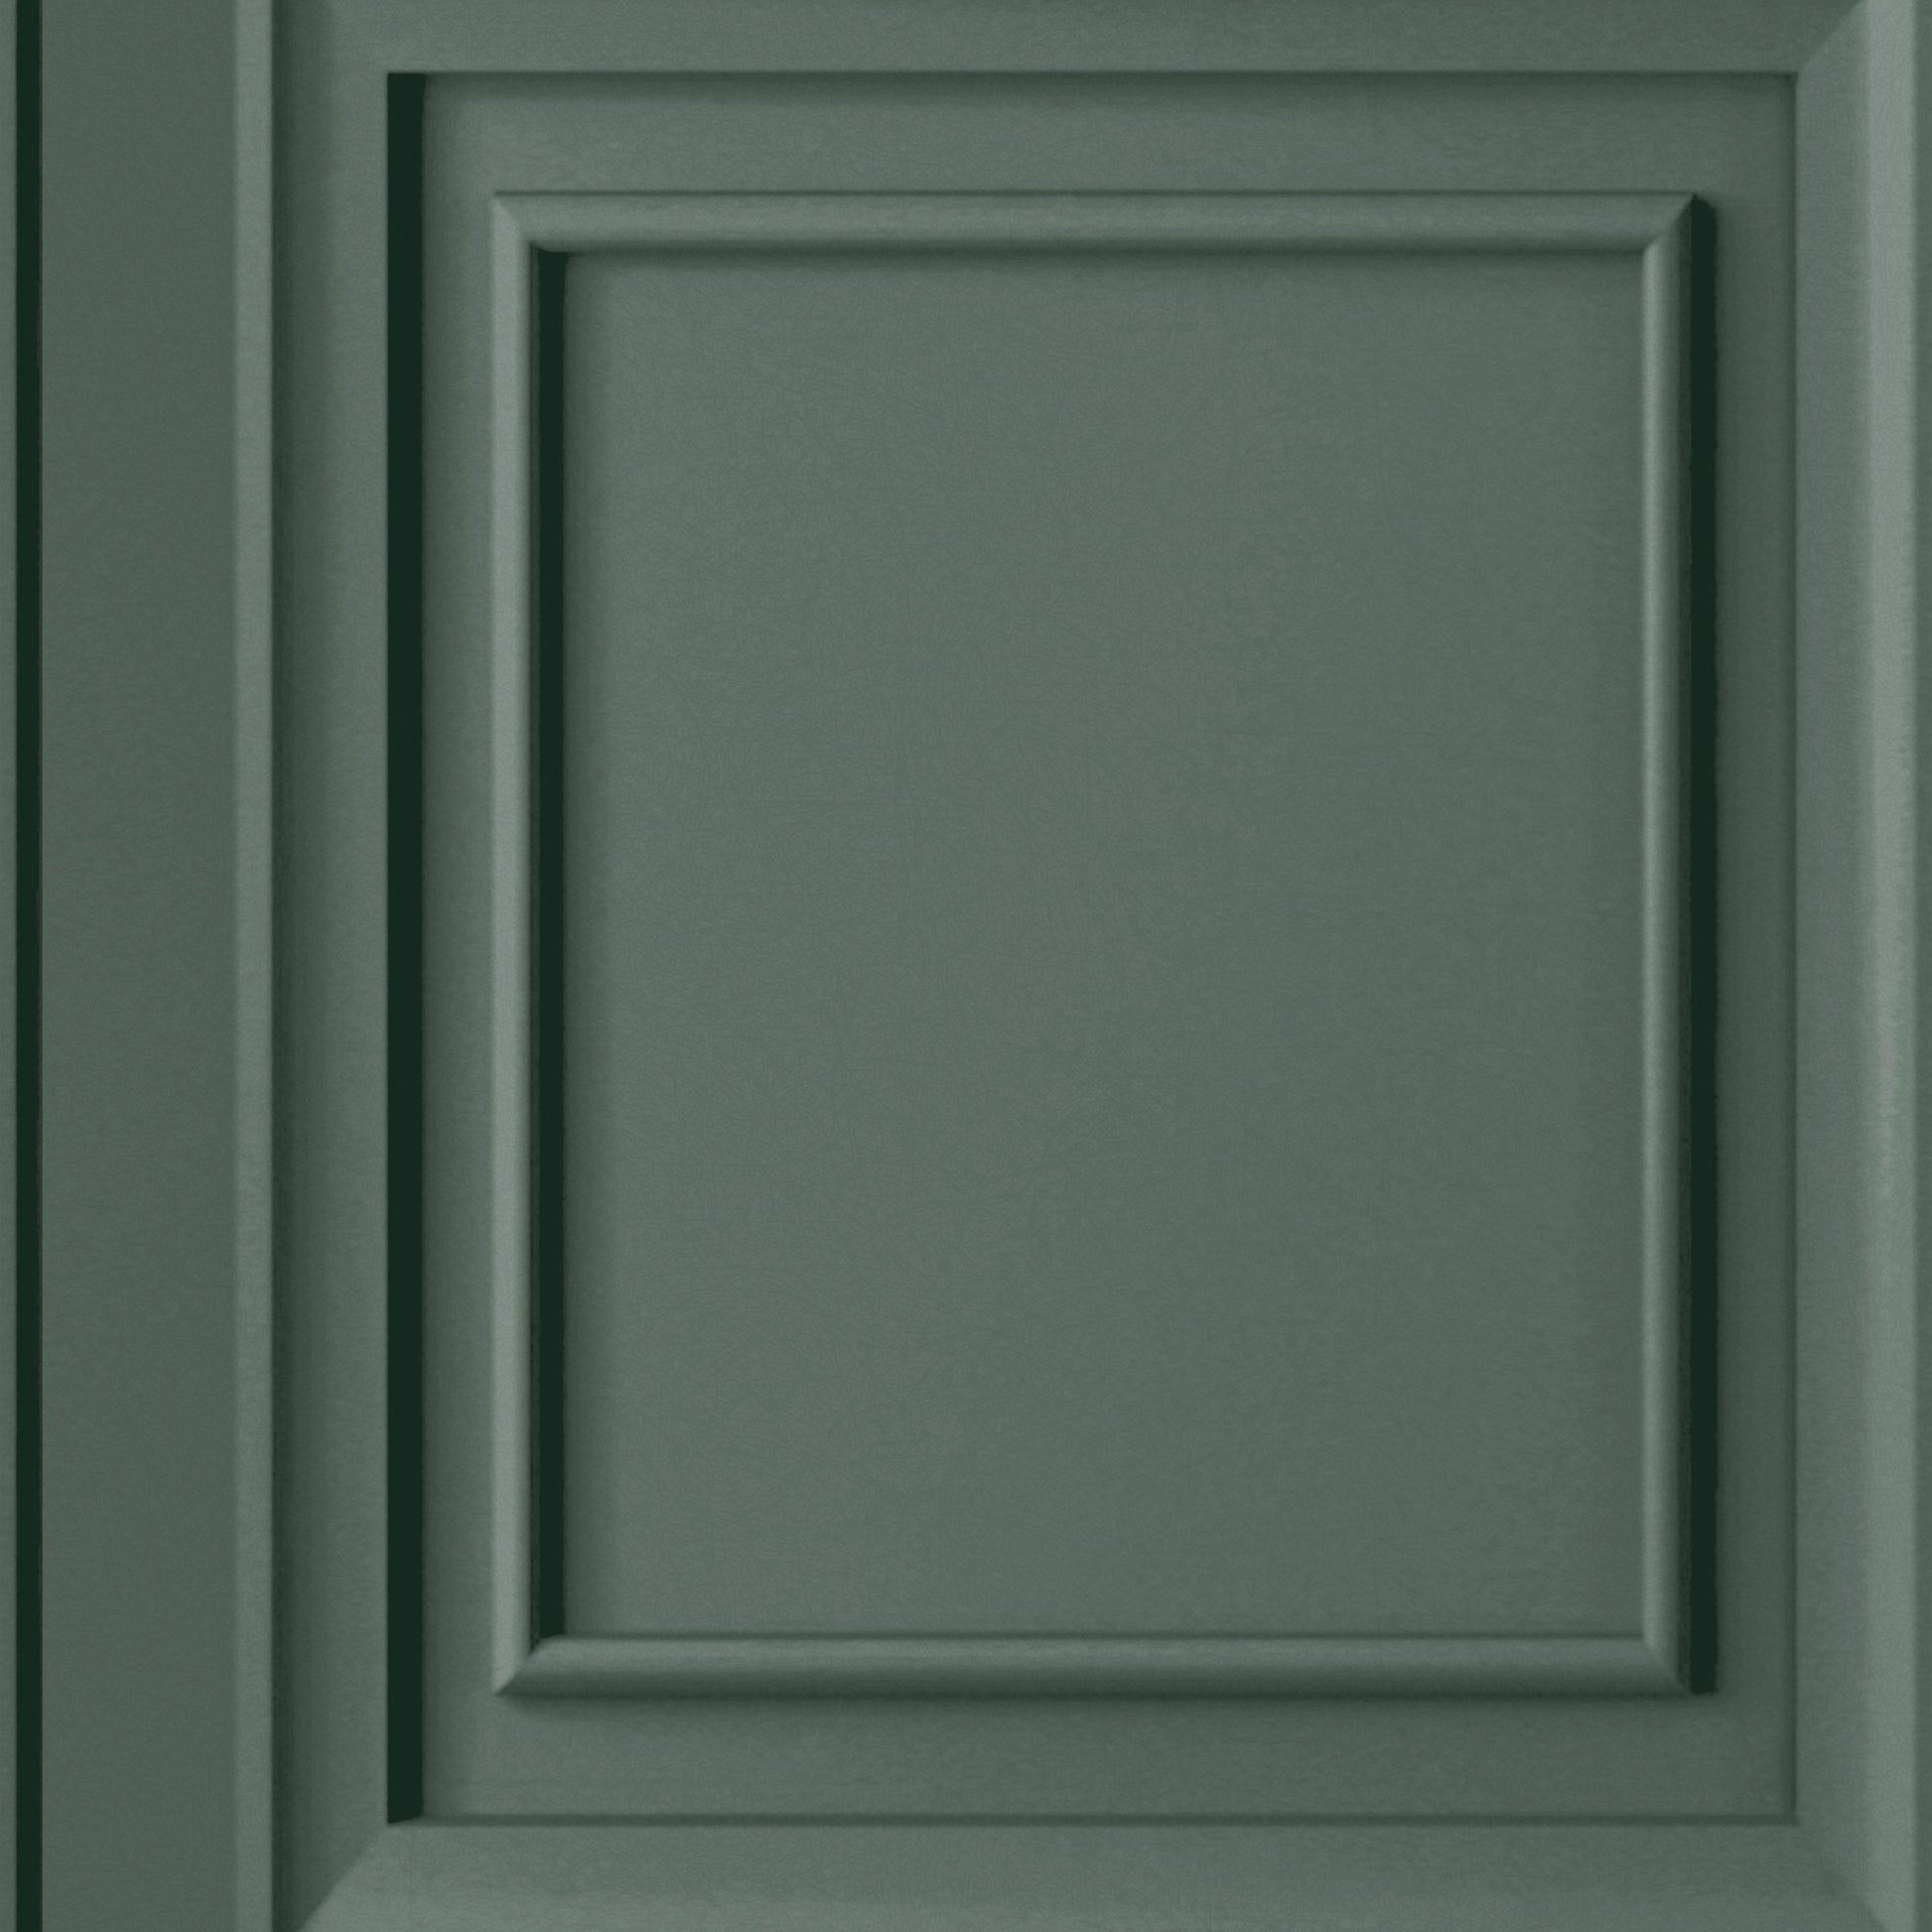 Purchase Laura Ashley Wallpaper Product# 119844 Redbrook Wood Panel Fern Green Removable